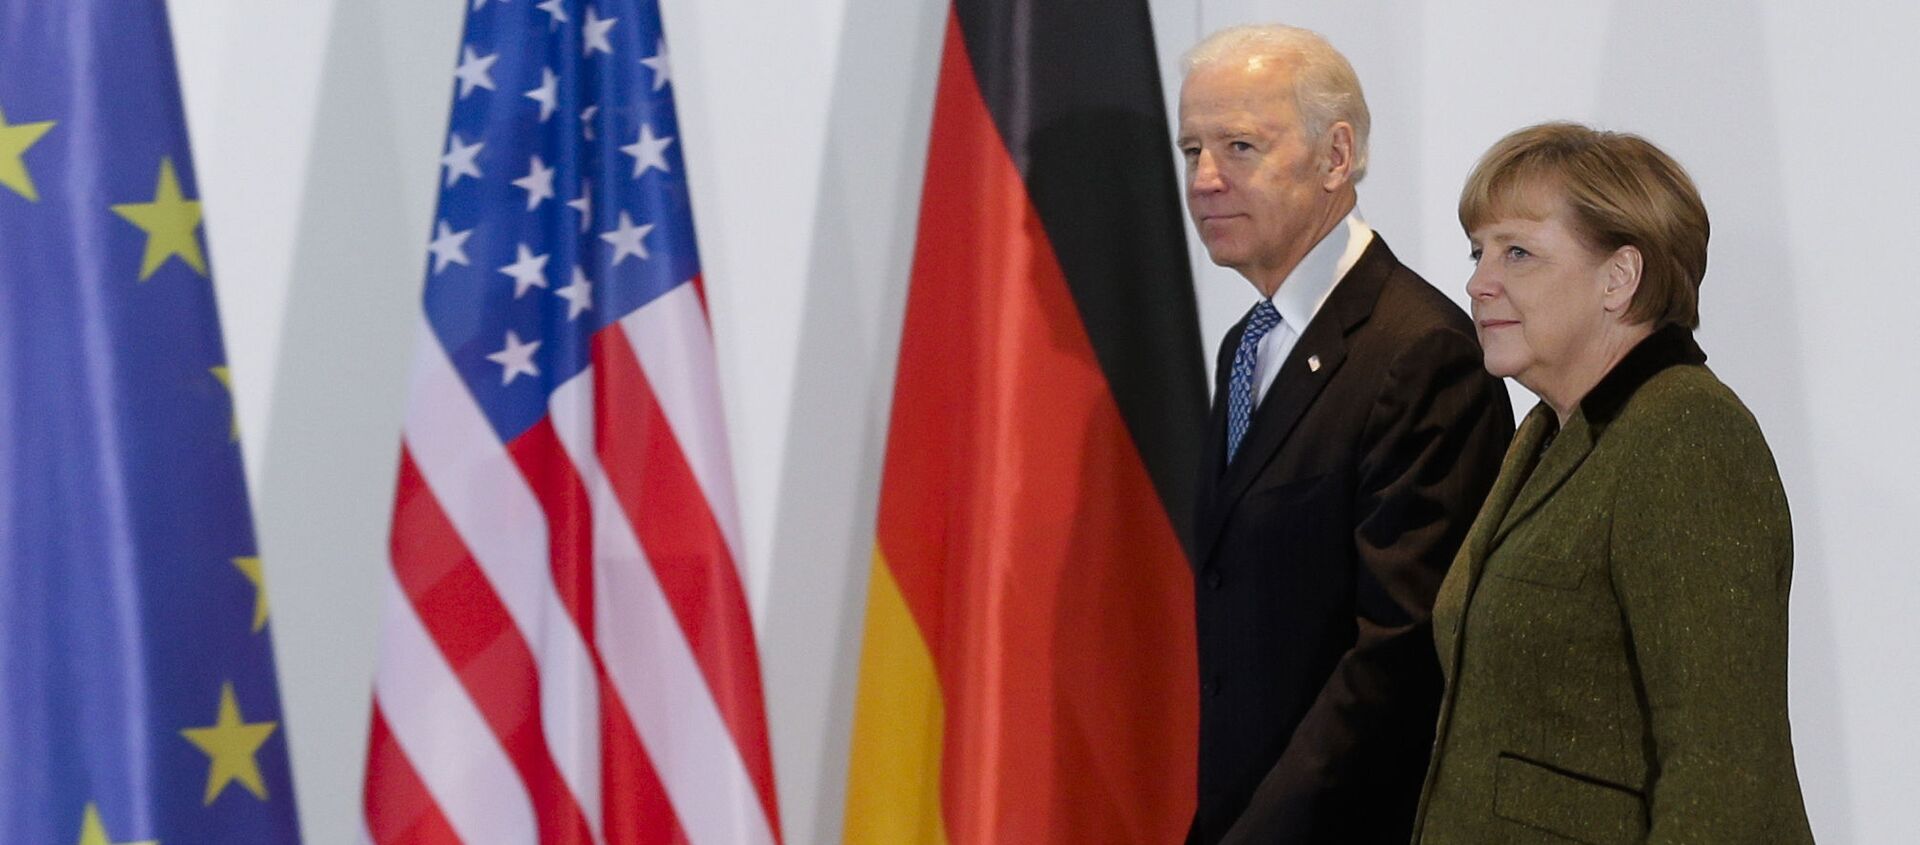 In this Feb. 1, 2013 file photo, German Chancellor Angela Merkel, right, and U.S. Vice President Joe Biden walk at the chancellery in Berlin, Germany. On Biden’s first foreign trip as president, he will find many of his hosts in Europe welcoming but wary after a tense four years between Europe and the U.S. under former President Donald Trump. (AP Photo/Markus Schreiber, File) - Sputnik International, 1920, 13.07.2021